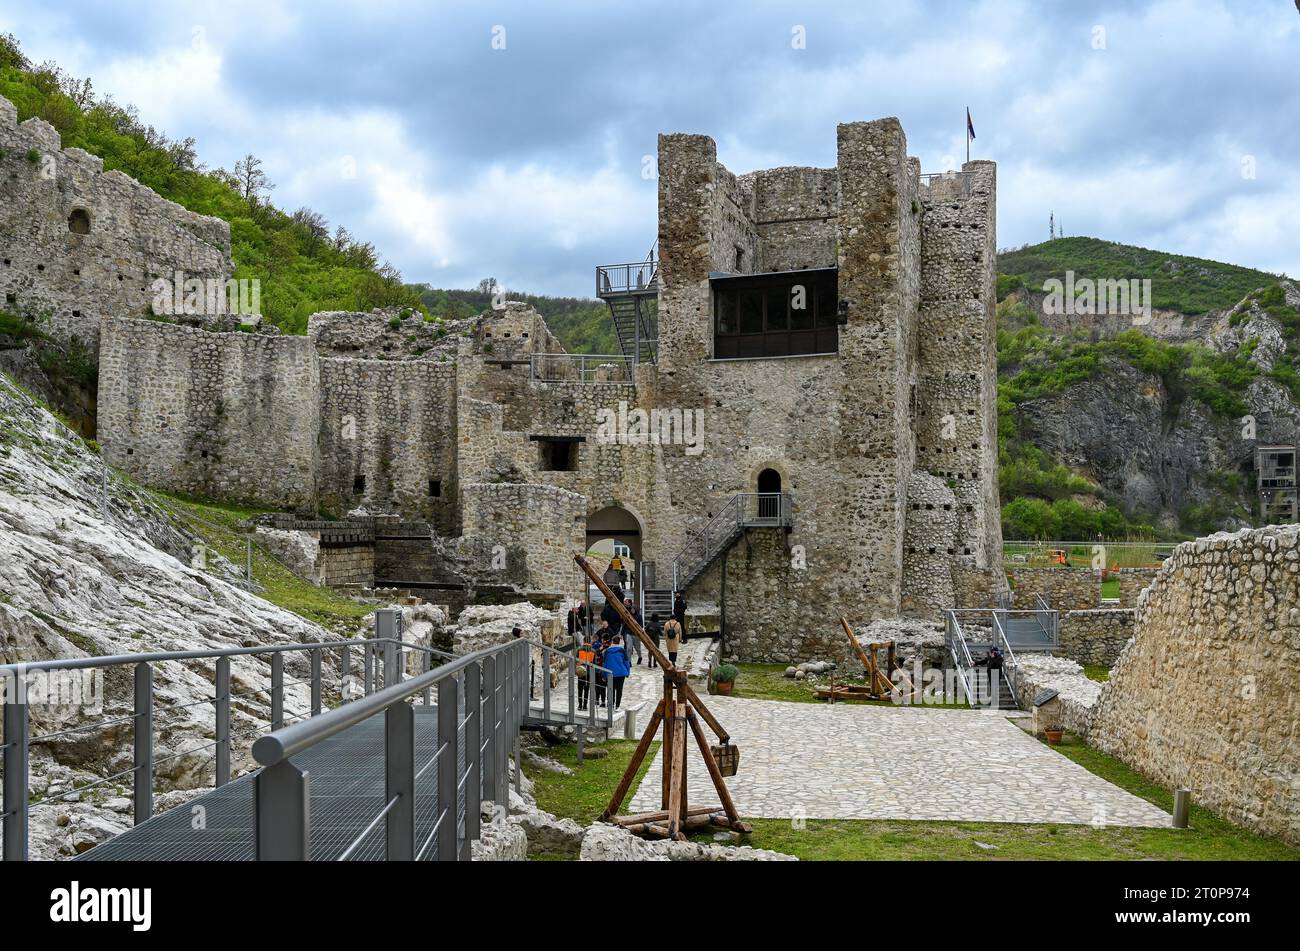 GOLUBAC, SERBIA - April 23, 2023: Golubac Fortress - medieval fortified town on the south side of the Danube River, Serbia Stock Photo